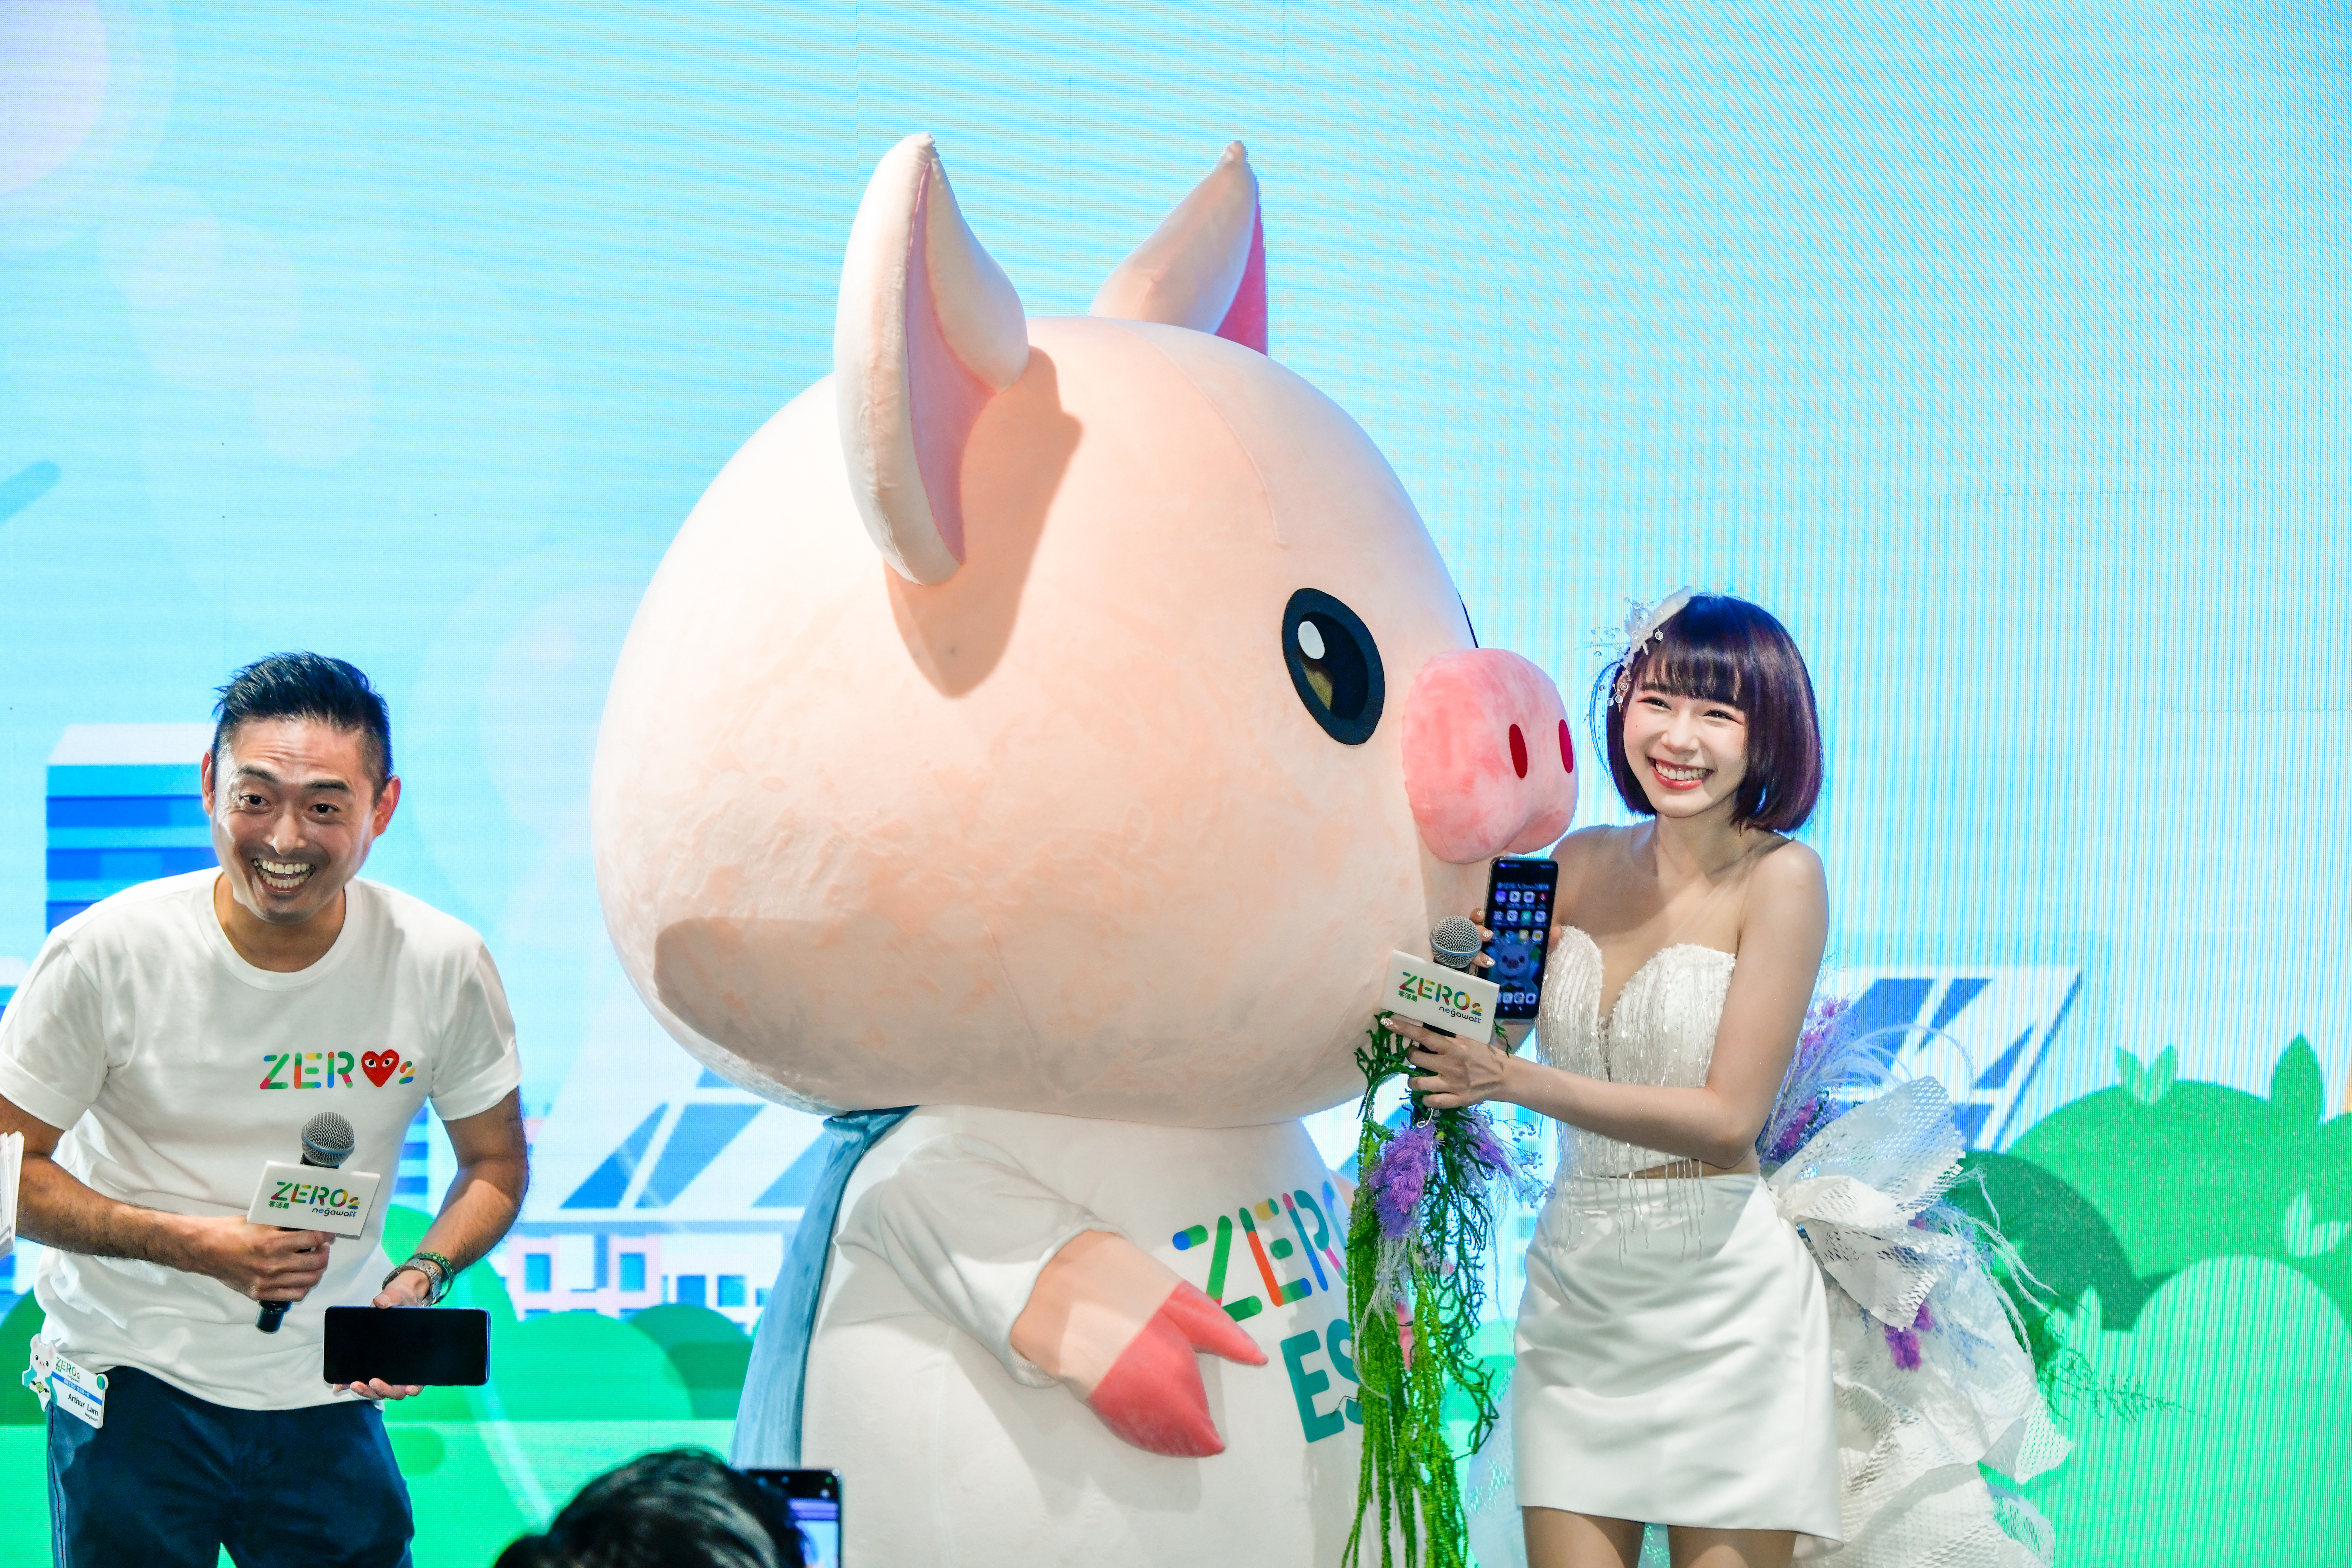 The endearing mascot of Zero2 “ES Pig” steals a kiss from his new “bride” Lin Min Chen